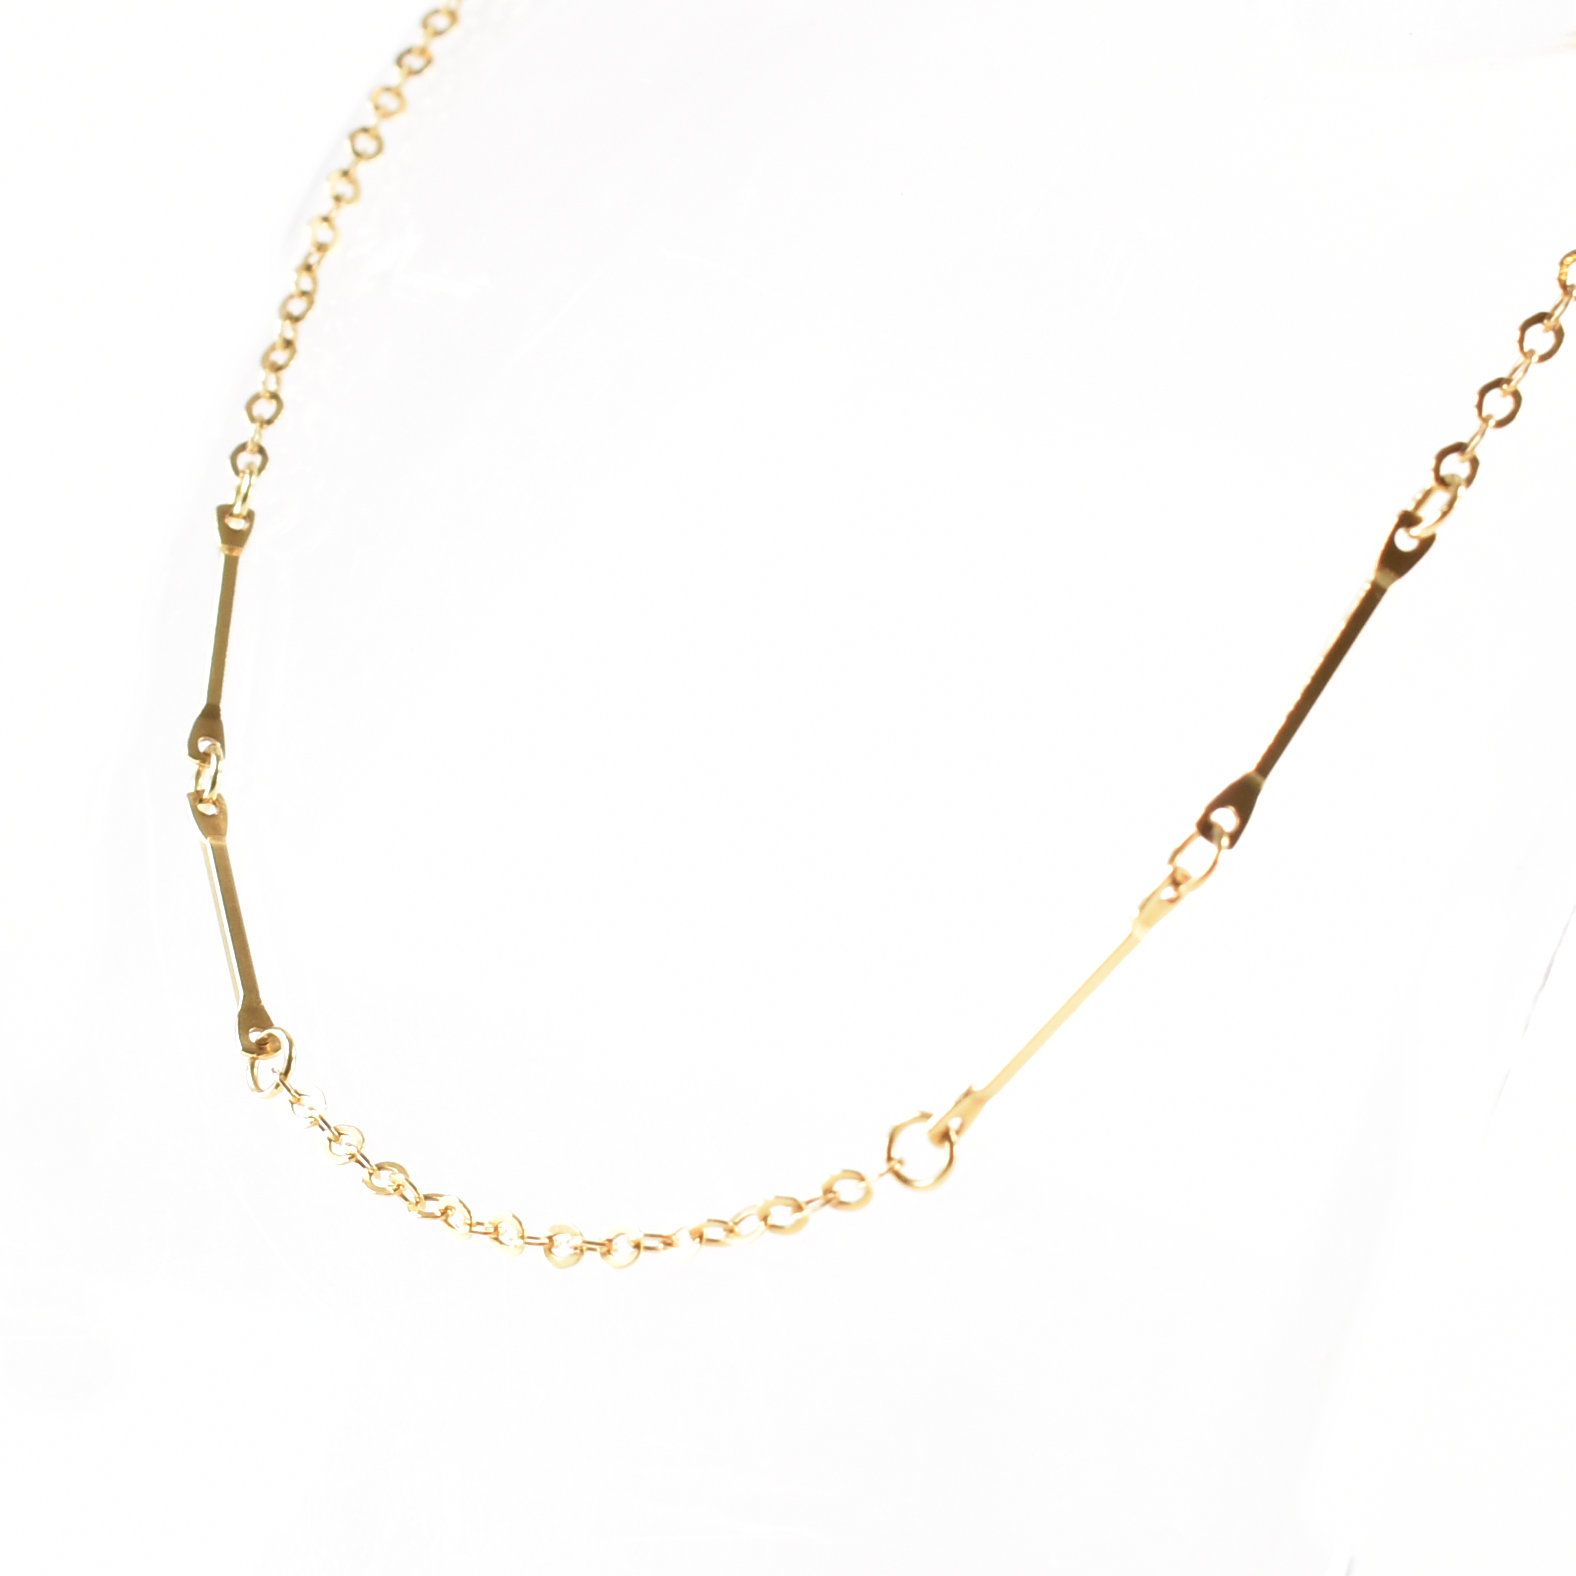 18CT GOLD BAR LINK NECKLACE CHAIN - Image 2 of 3